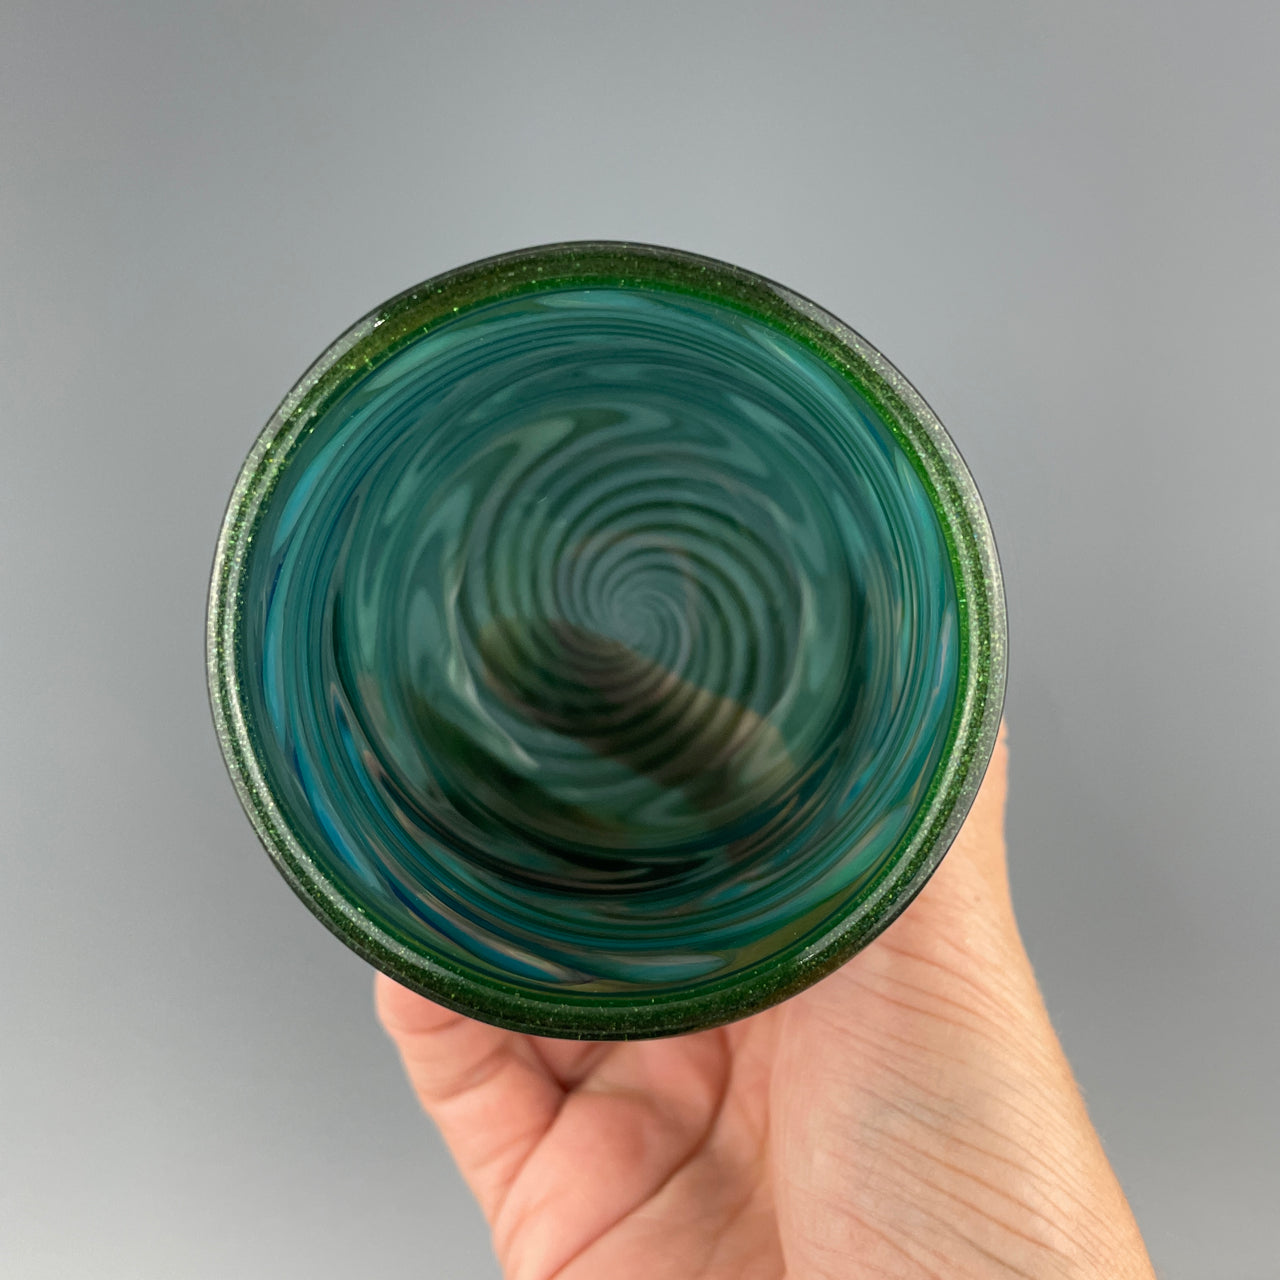 inside of a green and silver cup